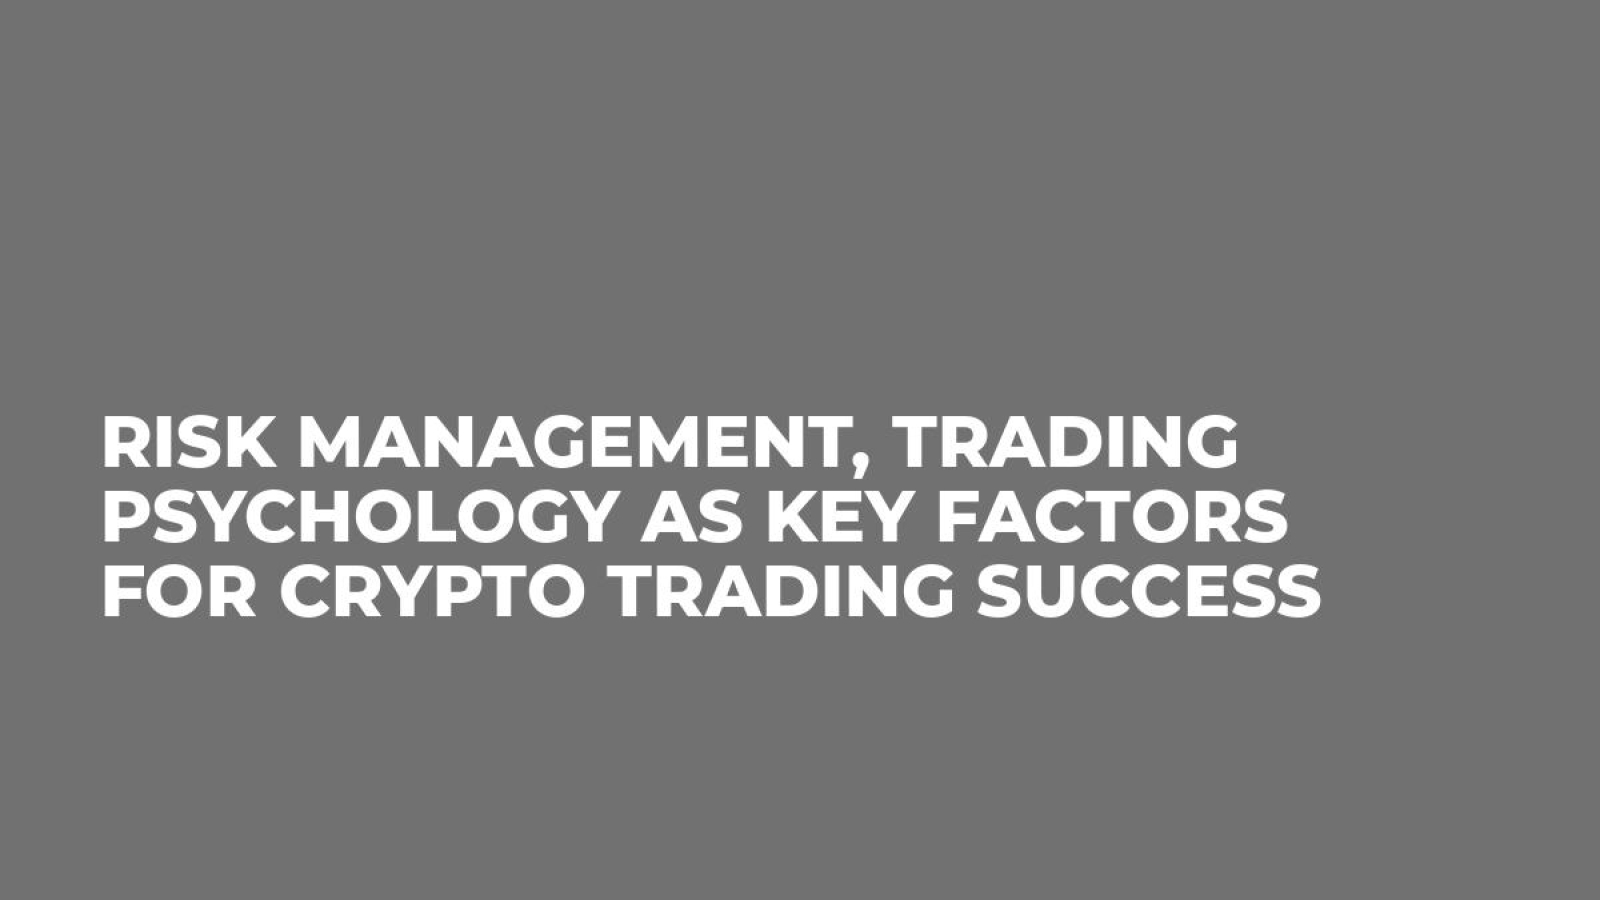 Risk Management, Trading Psychology As Key Factors For Crypto Trading Success